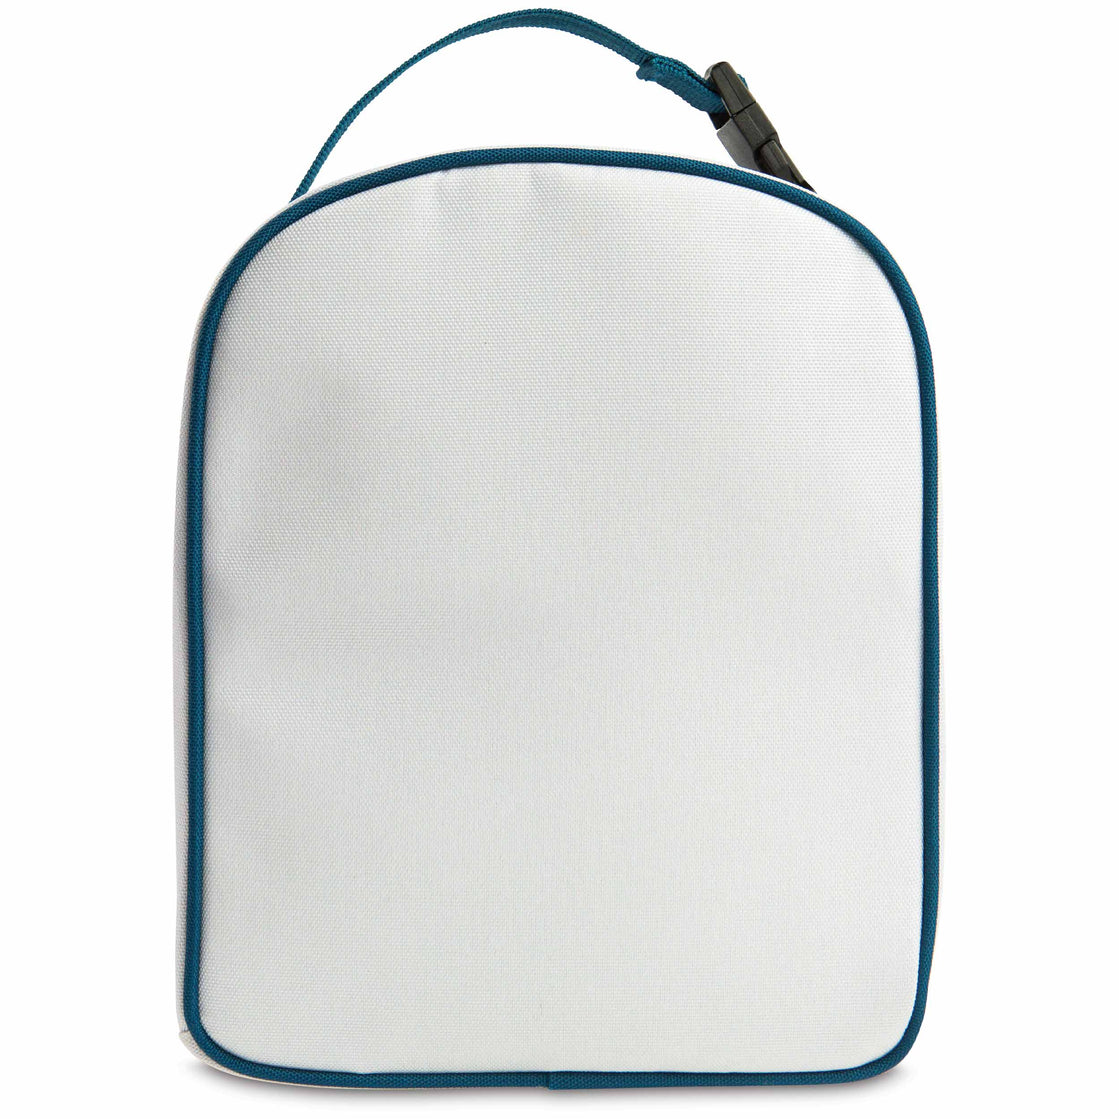 Shop for Lunch bags online, Tiffin Bags